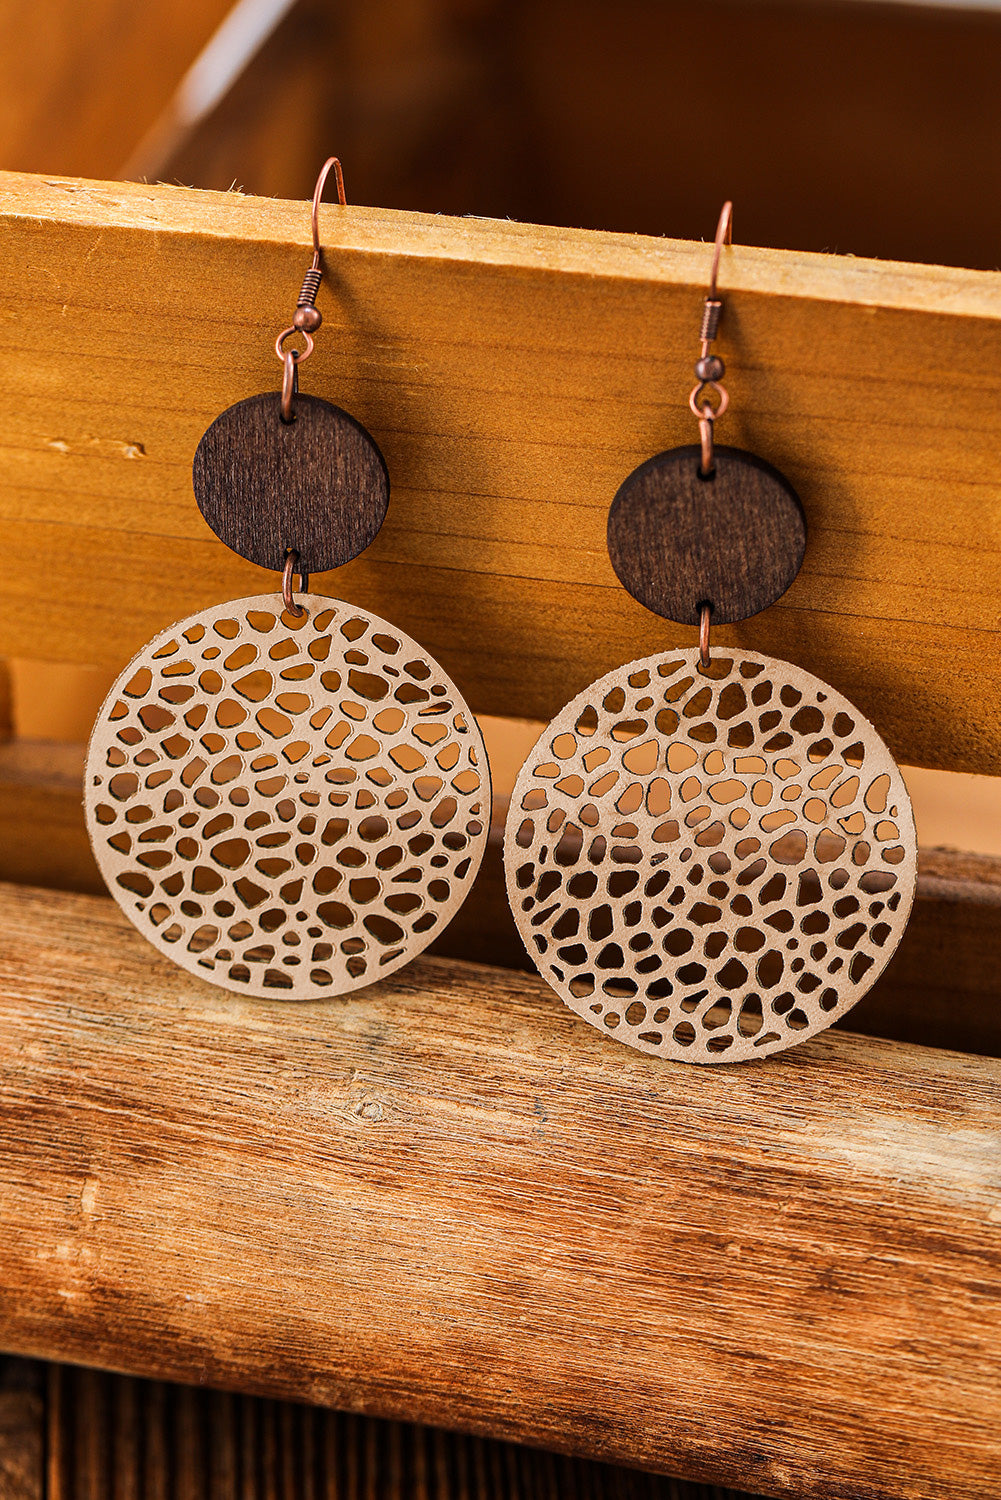 Khaki Hollow Out Wooden Round Drop Earrings - Dixie Hike & Style